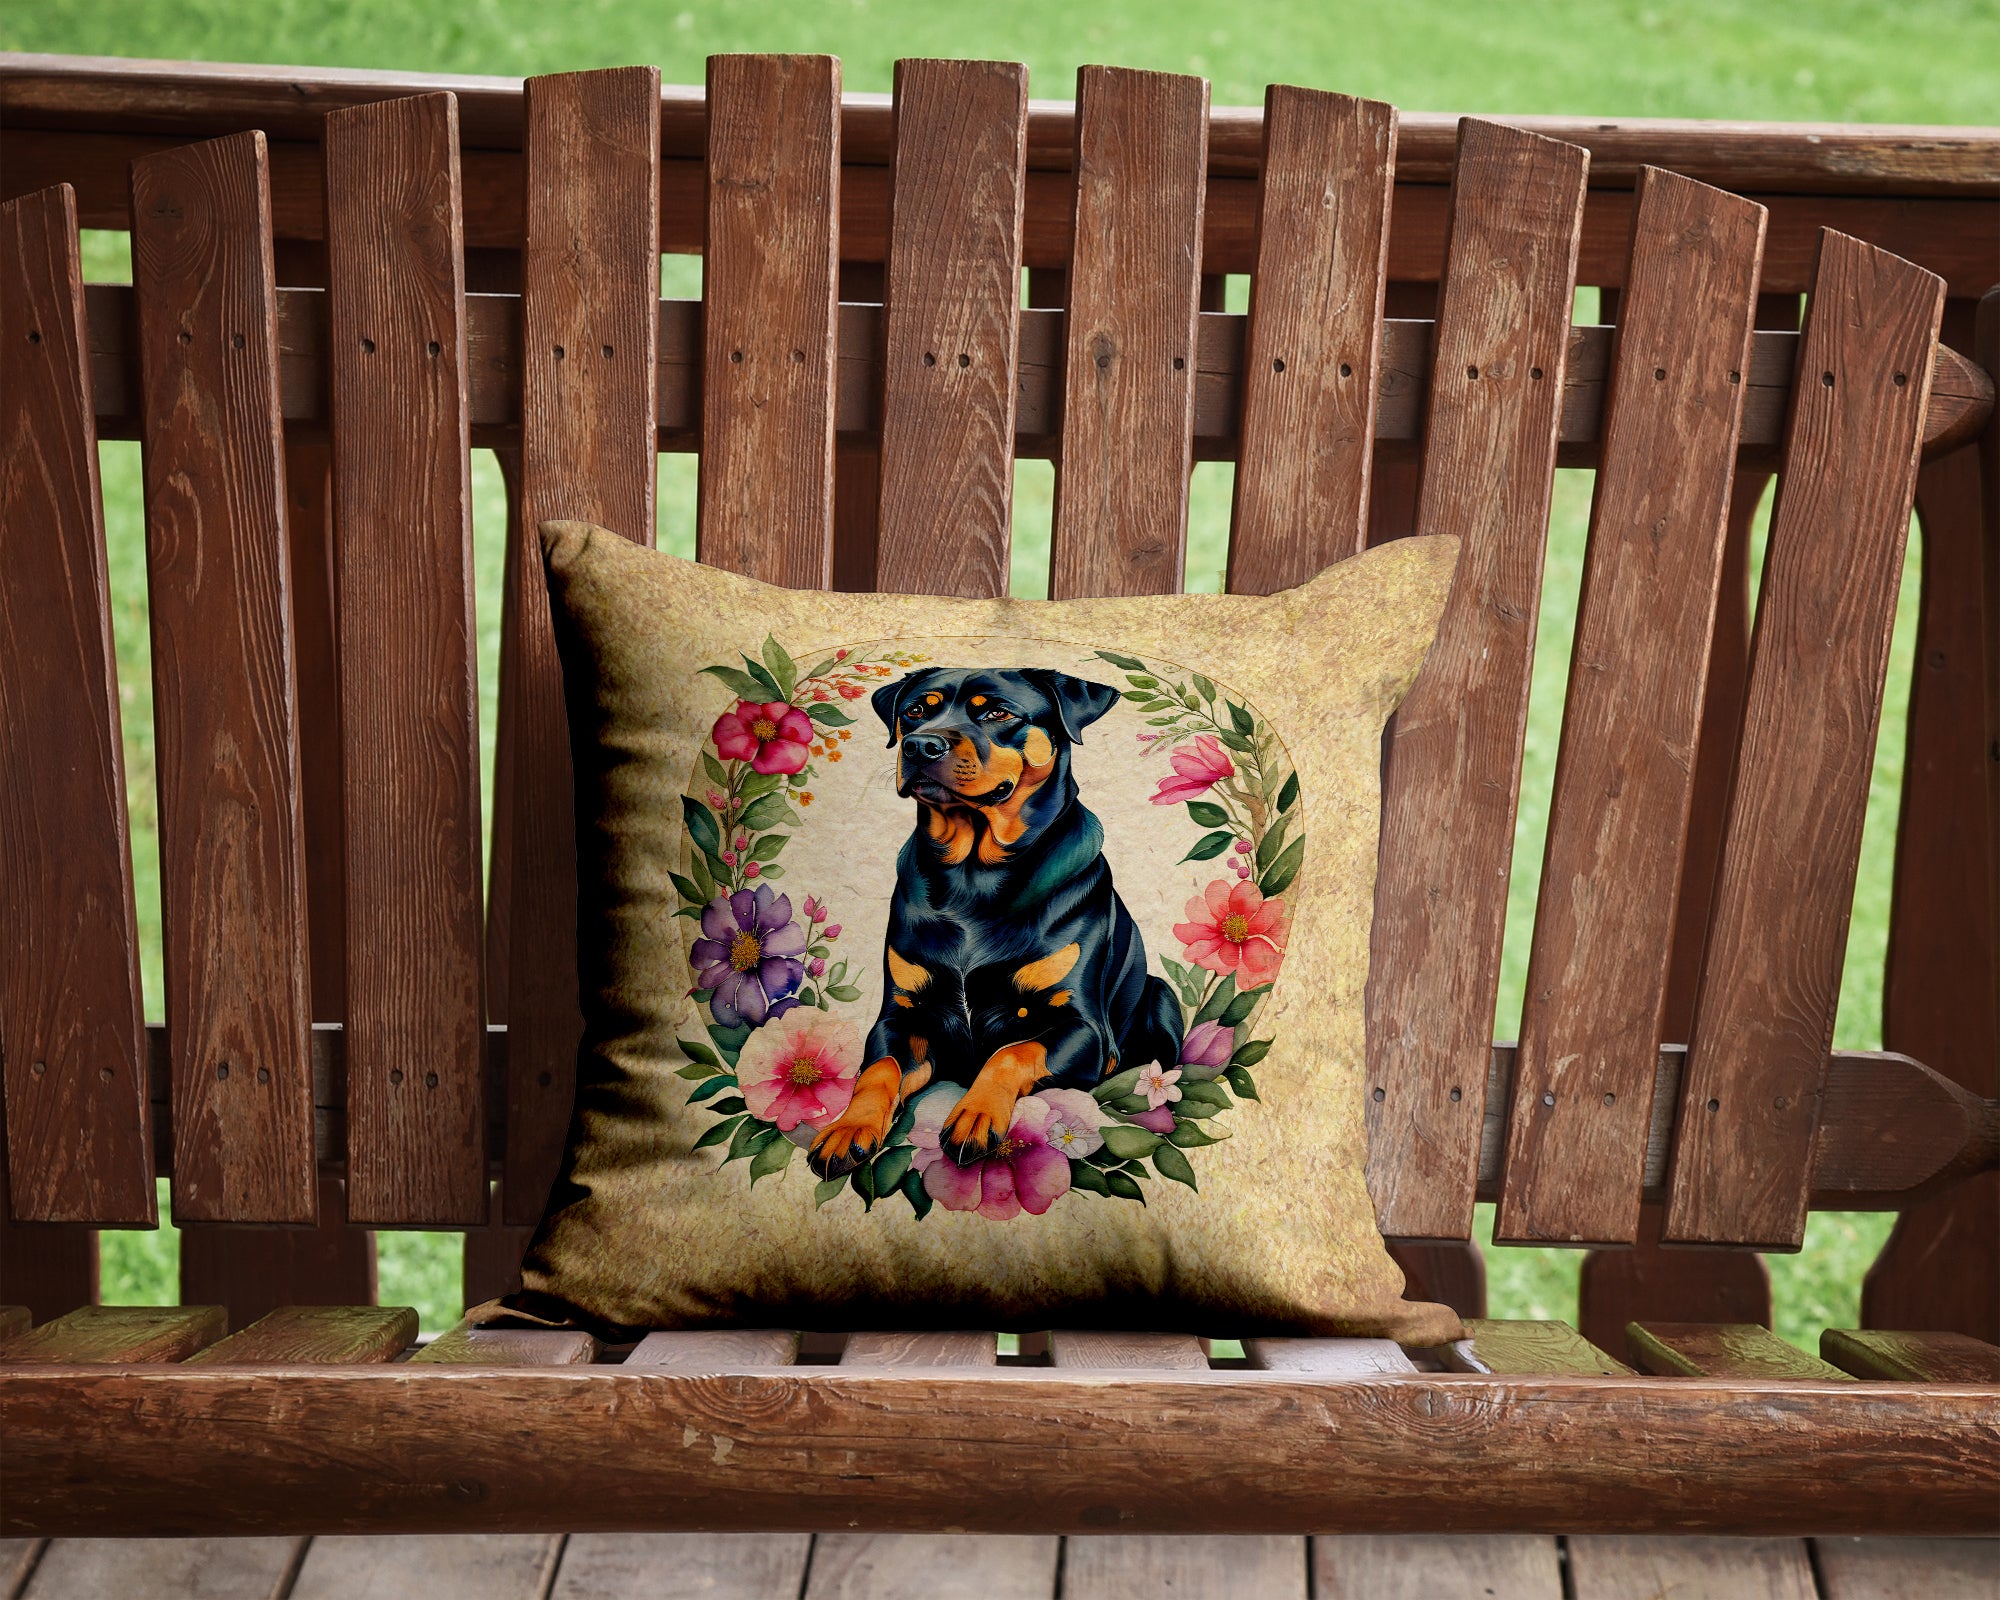 Rottweiler and Flowers Fabric Decorative Pillow